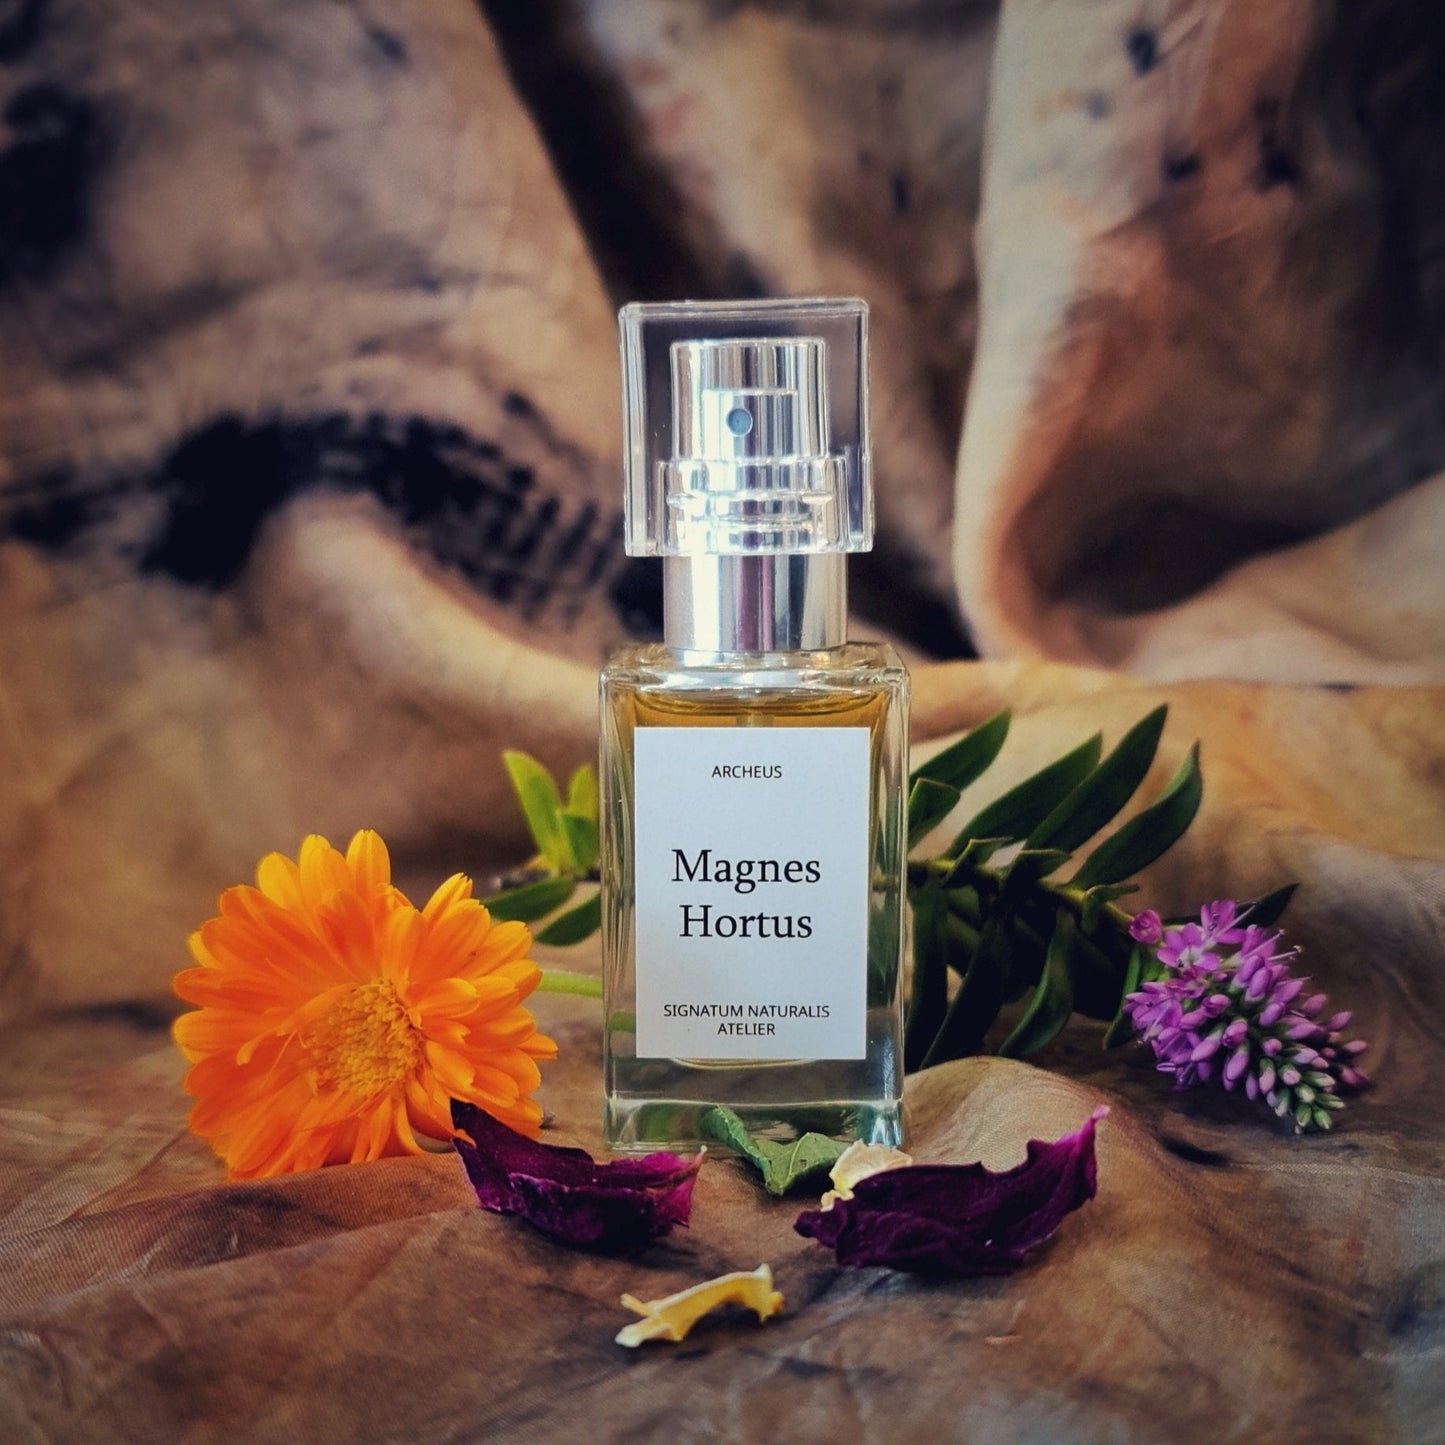 15ml bottle of Handcrafted limited edition natural perfume